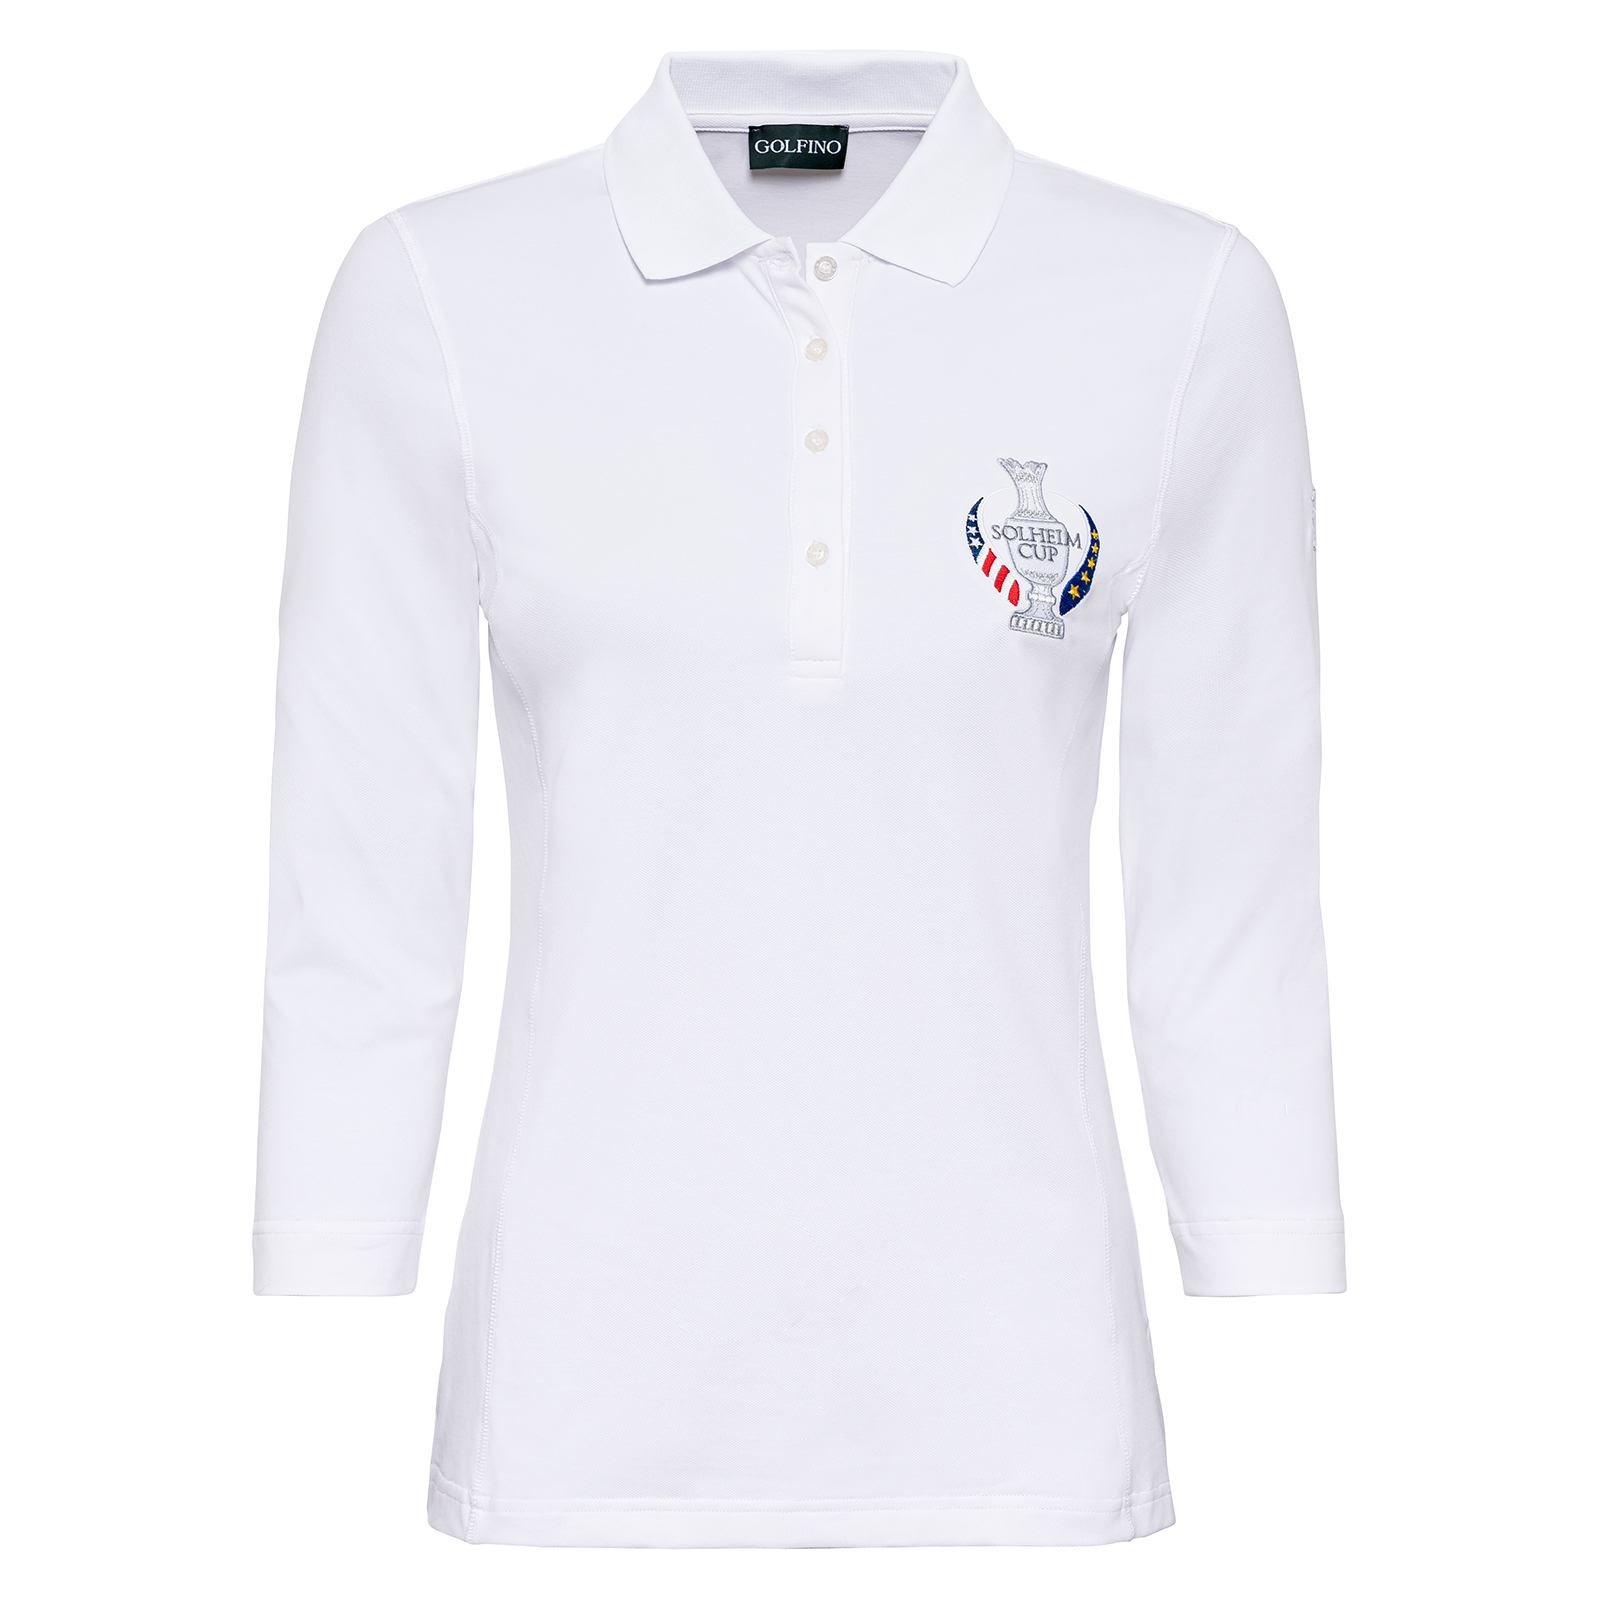 Ladies' polo shirt with UV function and Solheim Cup design 